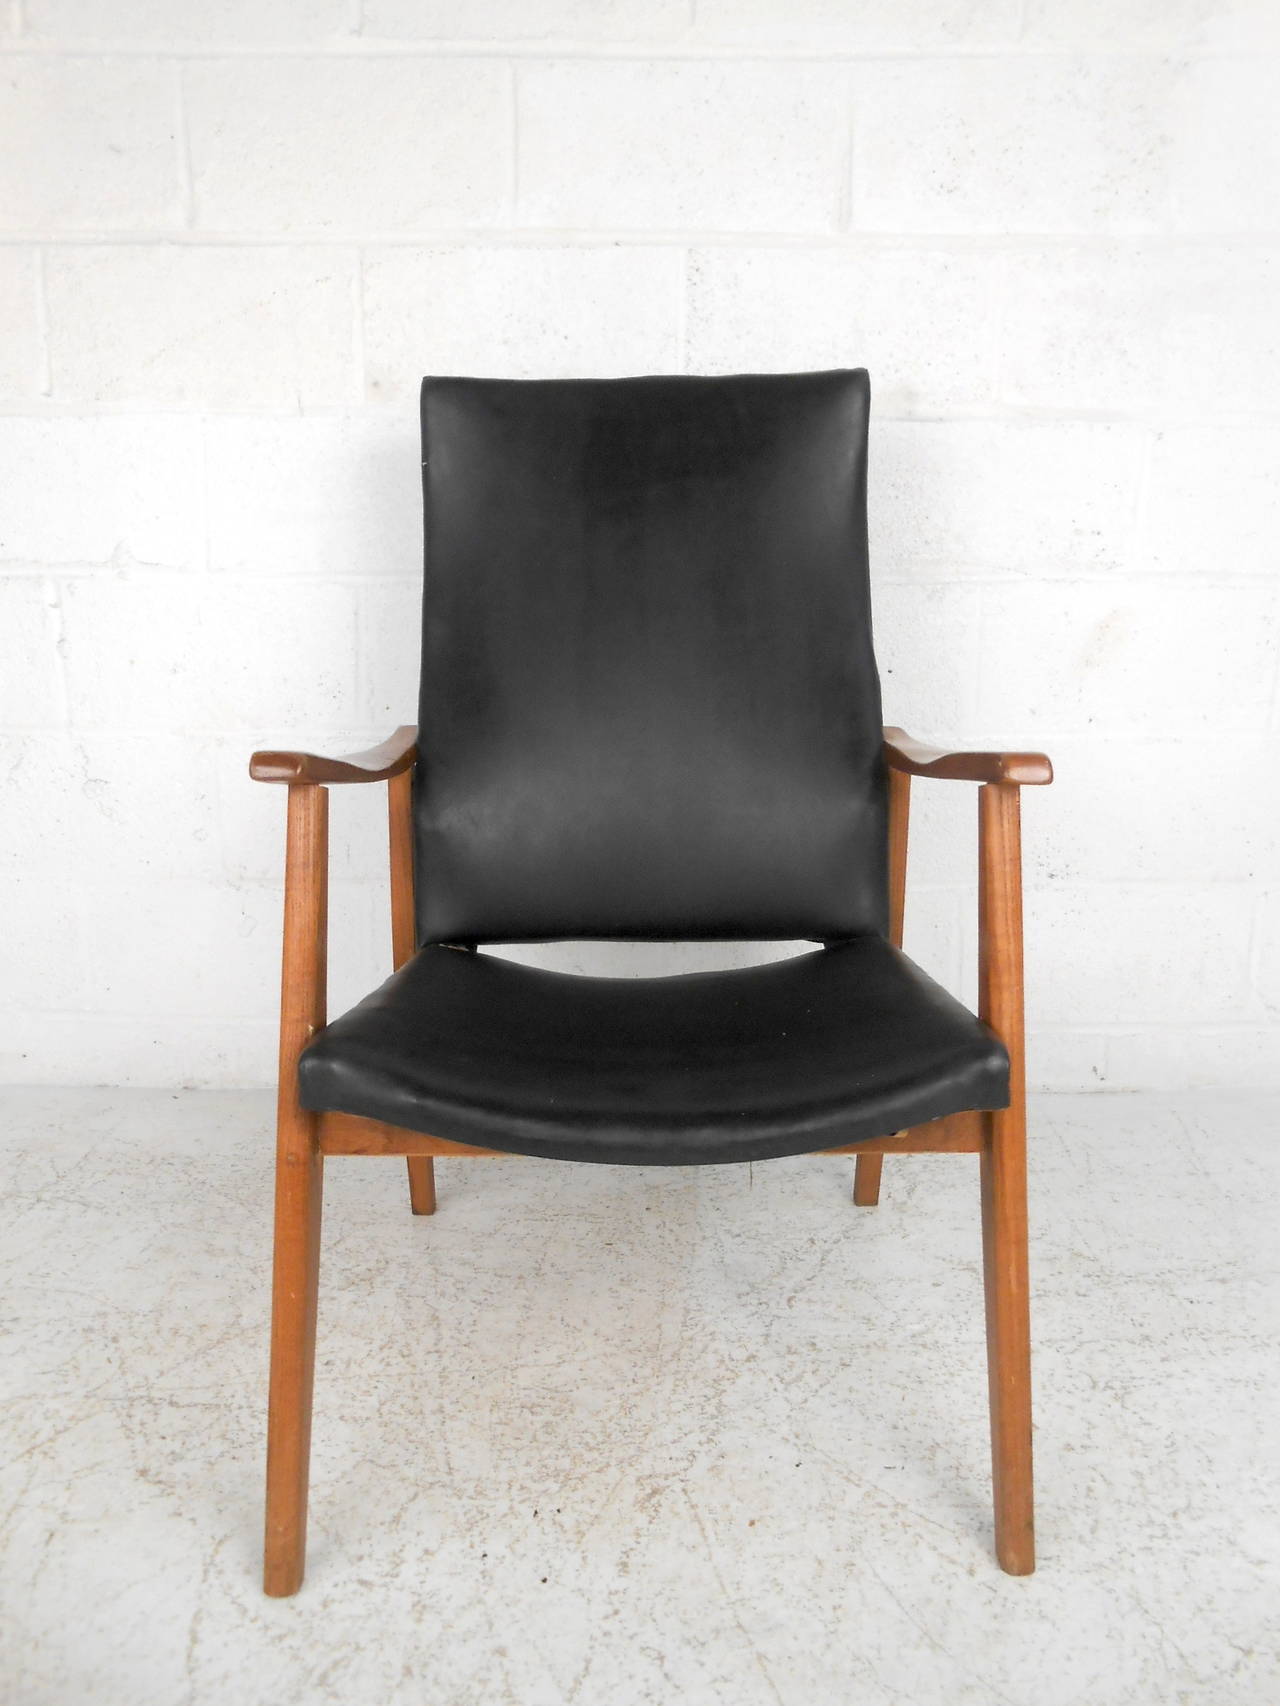 This mid century American lounge chair features a solid walnut frame and black vinyl upholstered seat which offers a subtle modern style to any home or office space.  

Please confirm item location (NY or NJ) with dealer.